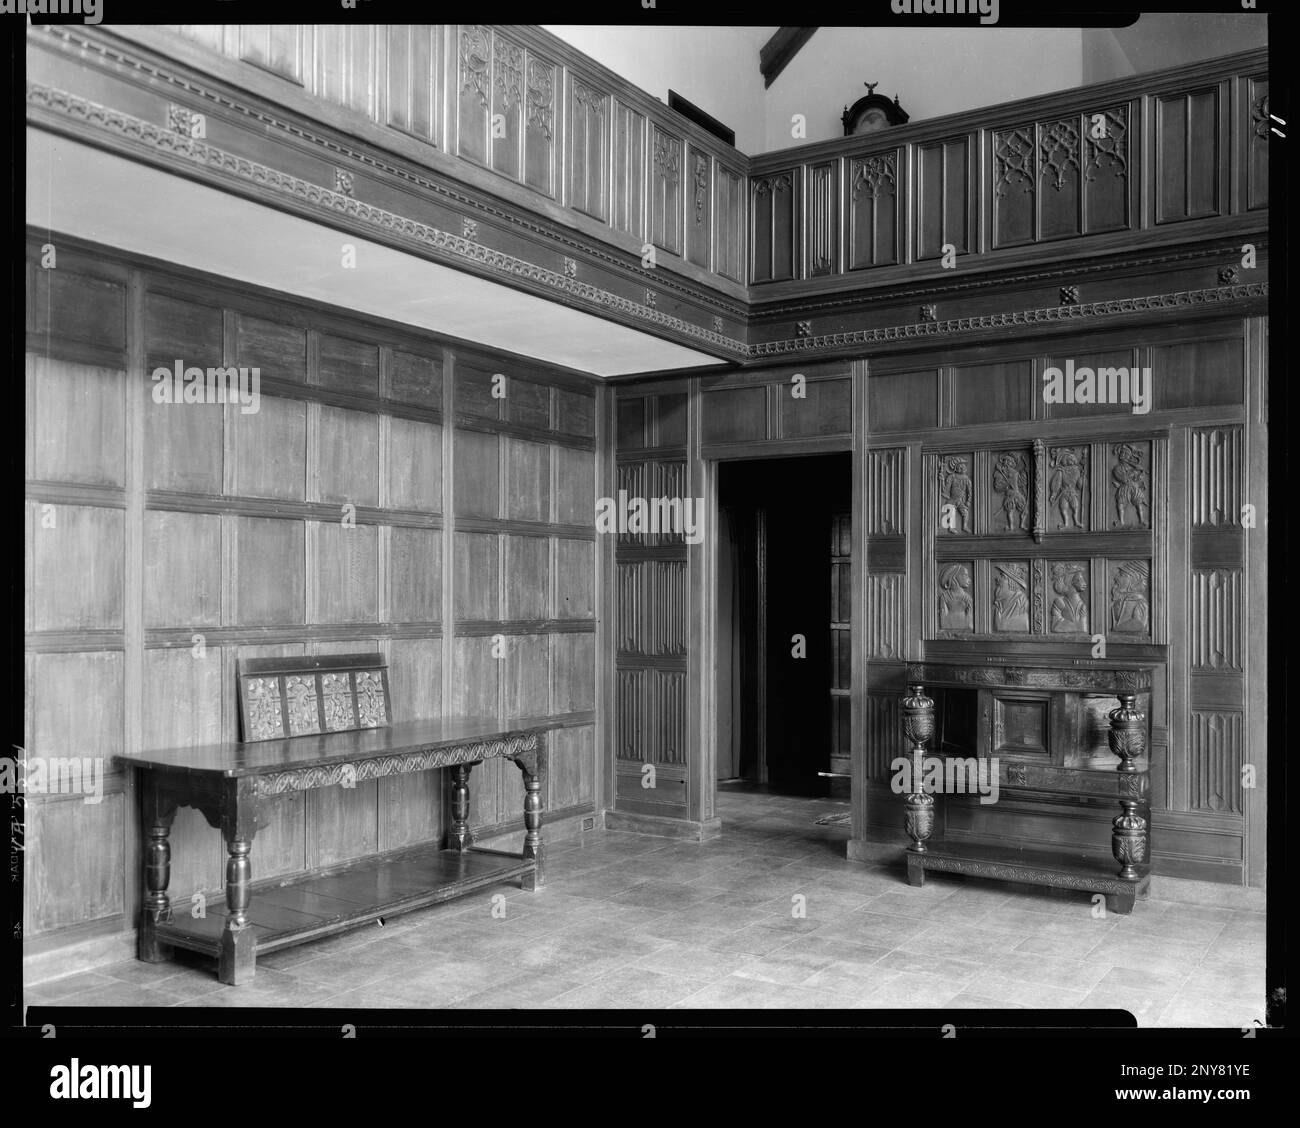 Agecroft Hall, Richmond, Henrico County, Virginia. Carnegie Survey of the Architecture of the South. United States  Virginia  Henrico County  Richmond, Doors & doorways, Paneling, Woodwork, Tables. Stock Photo